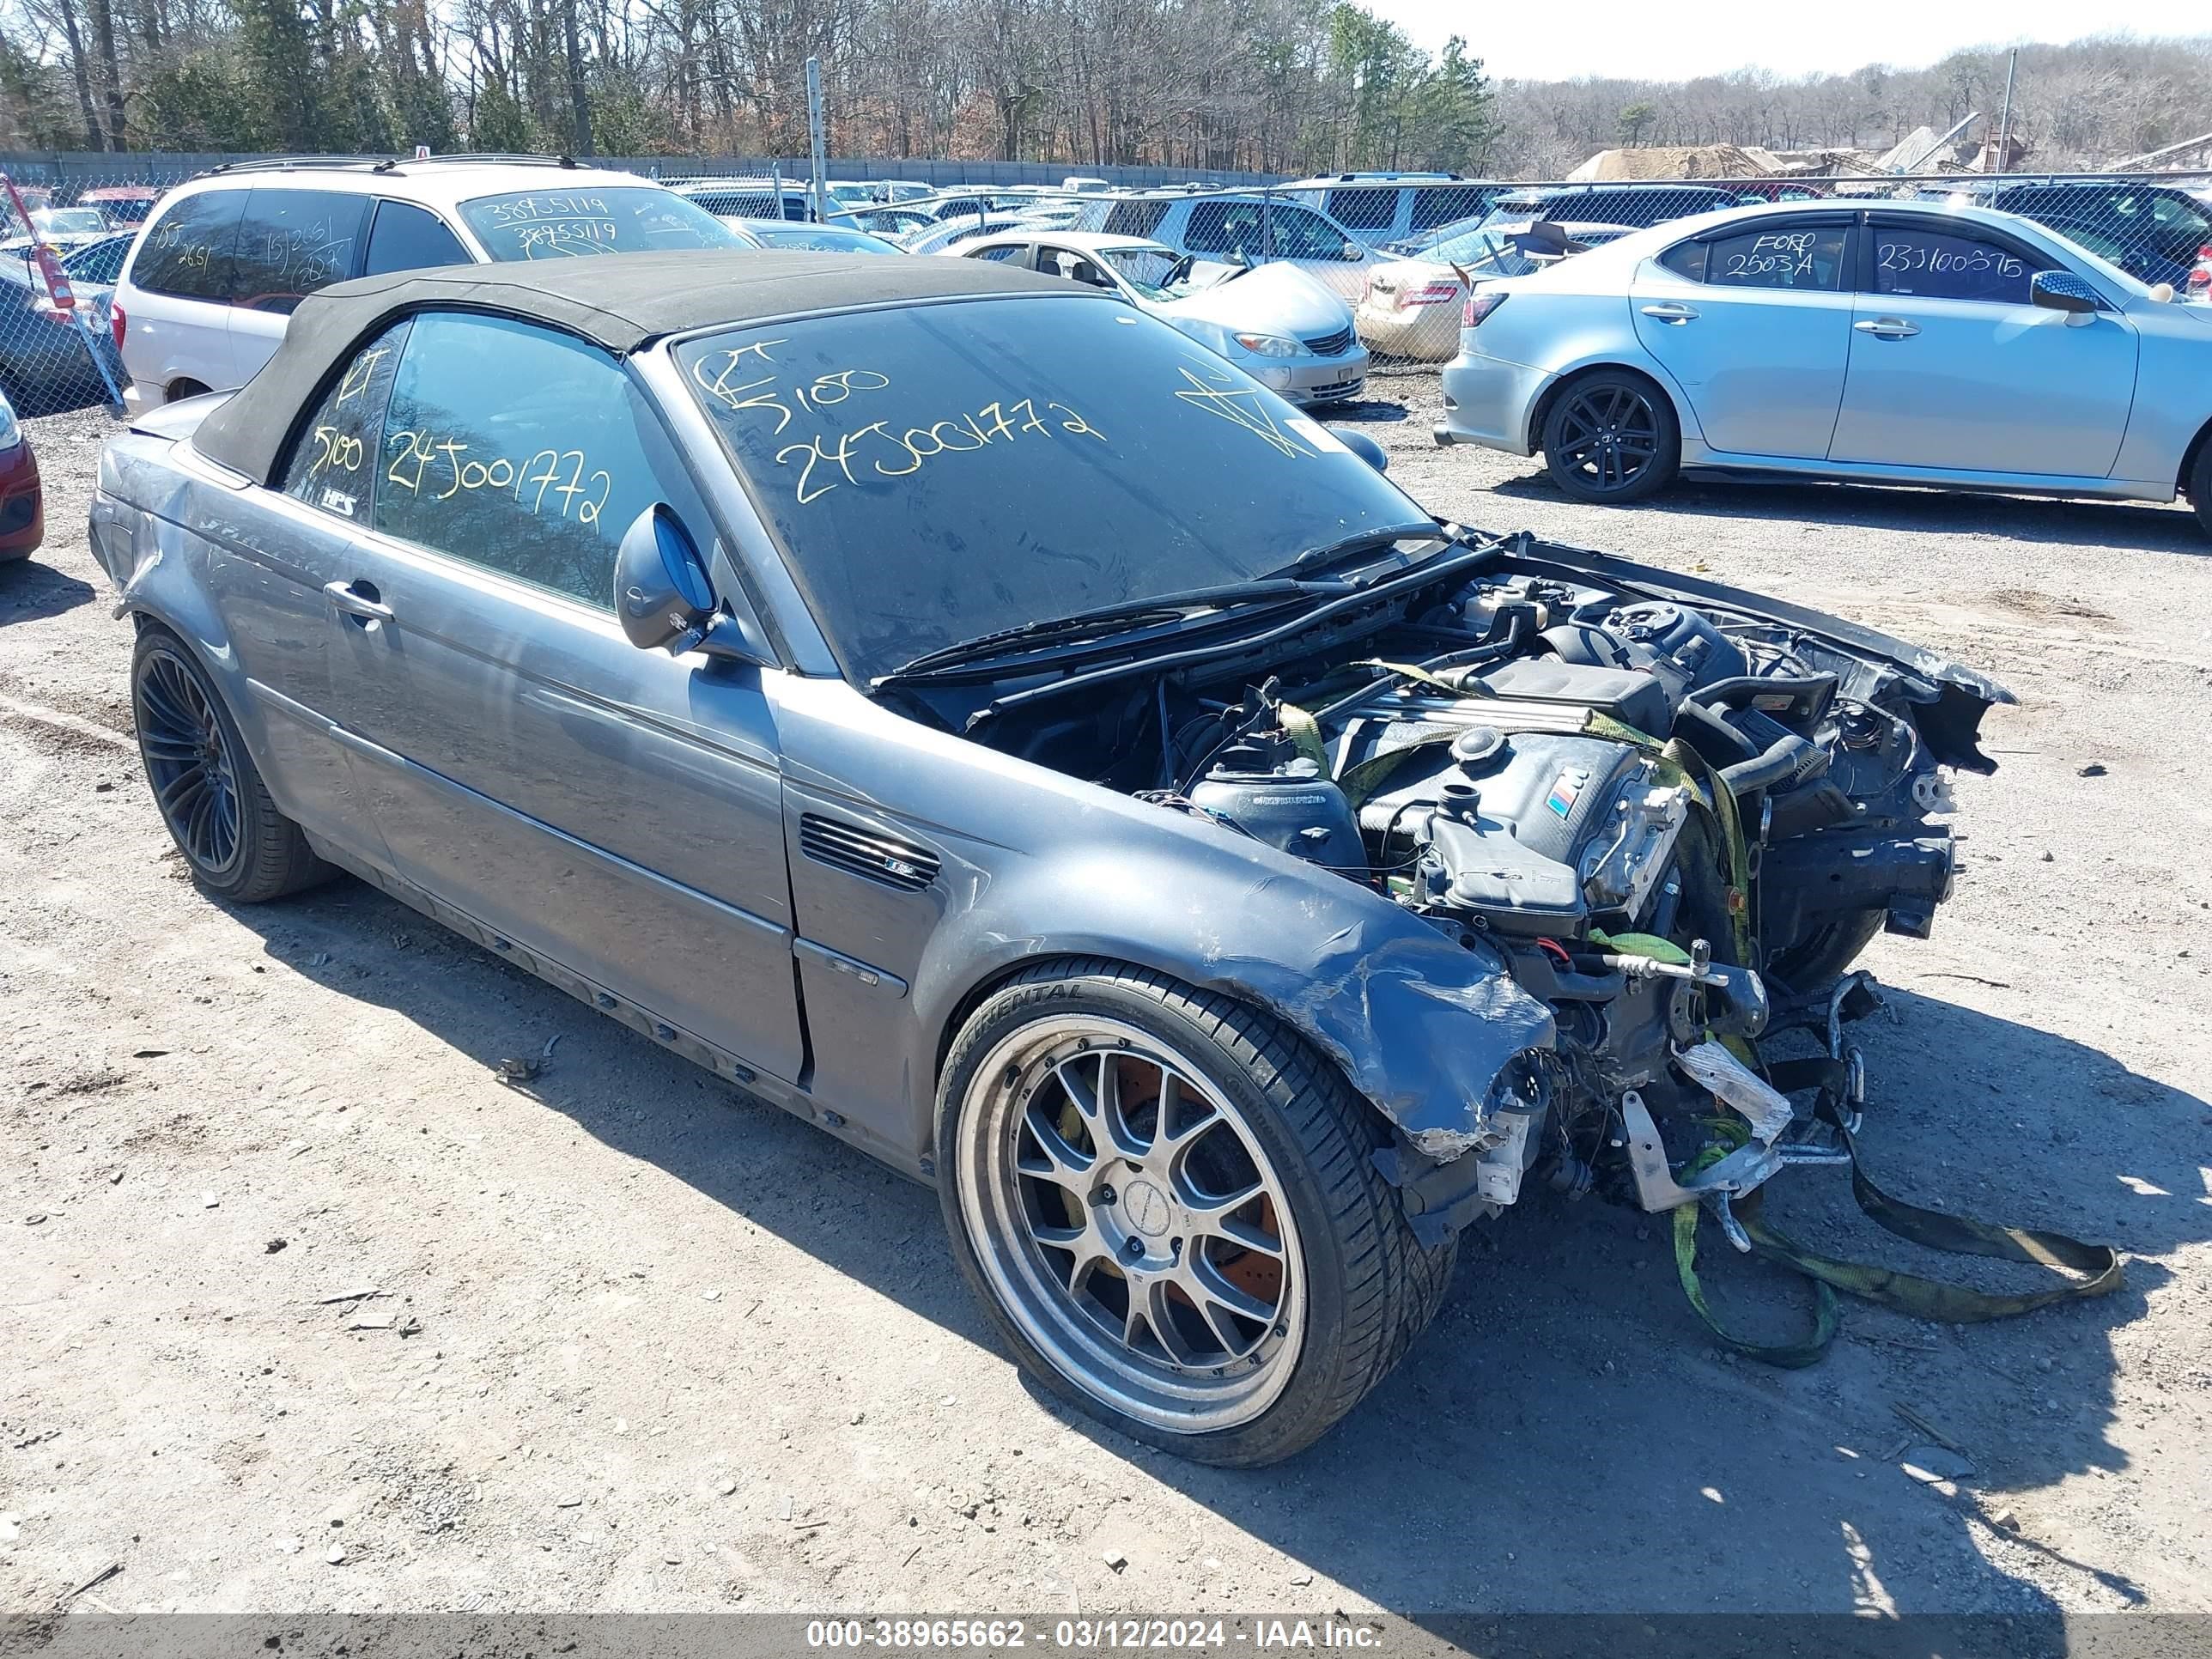 vin: WBSBR93443PK02202 WBSBR93443PK02202 2003 bmw m3 3200 for Sale in 11763, 156 Peconic Ave, Medford, New York, USA